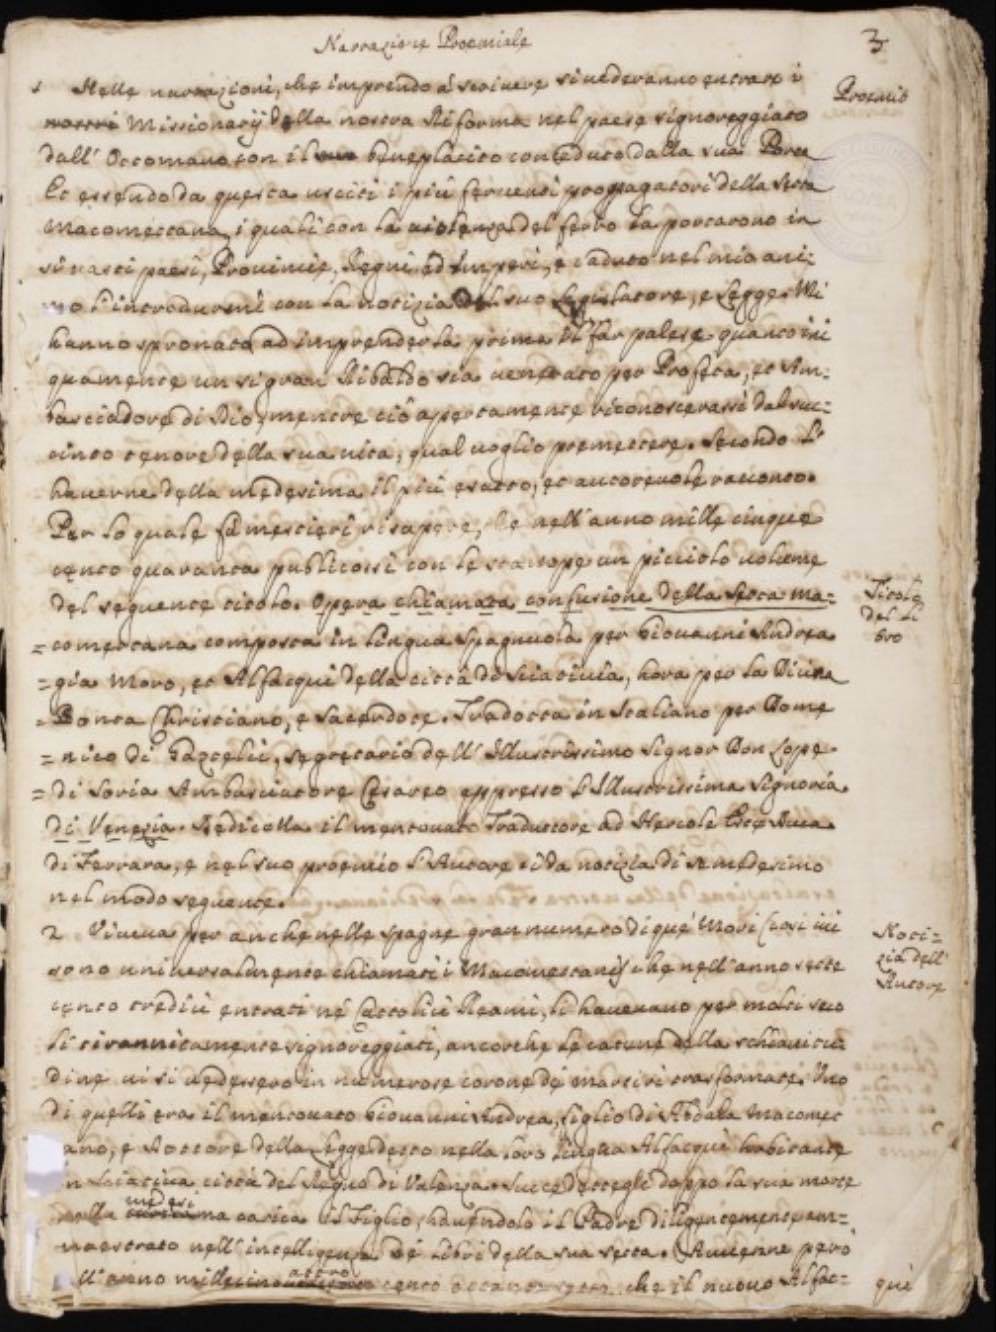 Page from a history of the Aleppo mission of the Discalced Carmelites, by <a href='https://haf.vhmml.org/person/632765168043'>Biagio, della Purificazione</a> (<a href='https://www.vhmml.org/readingRoom/view/625207'>AGOCD 00244 001</a>)